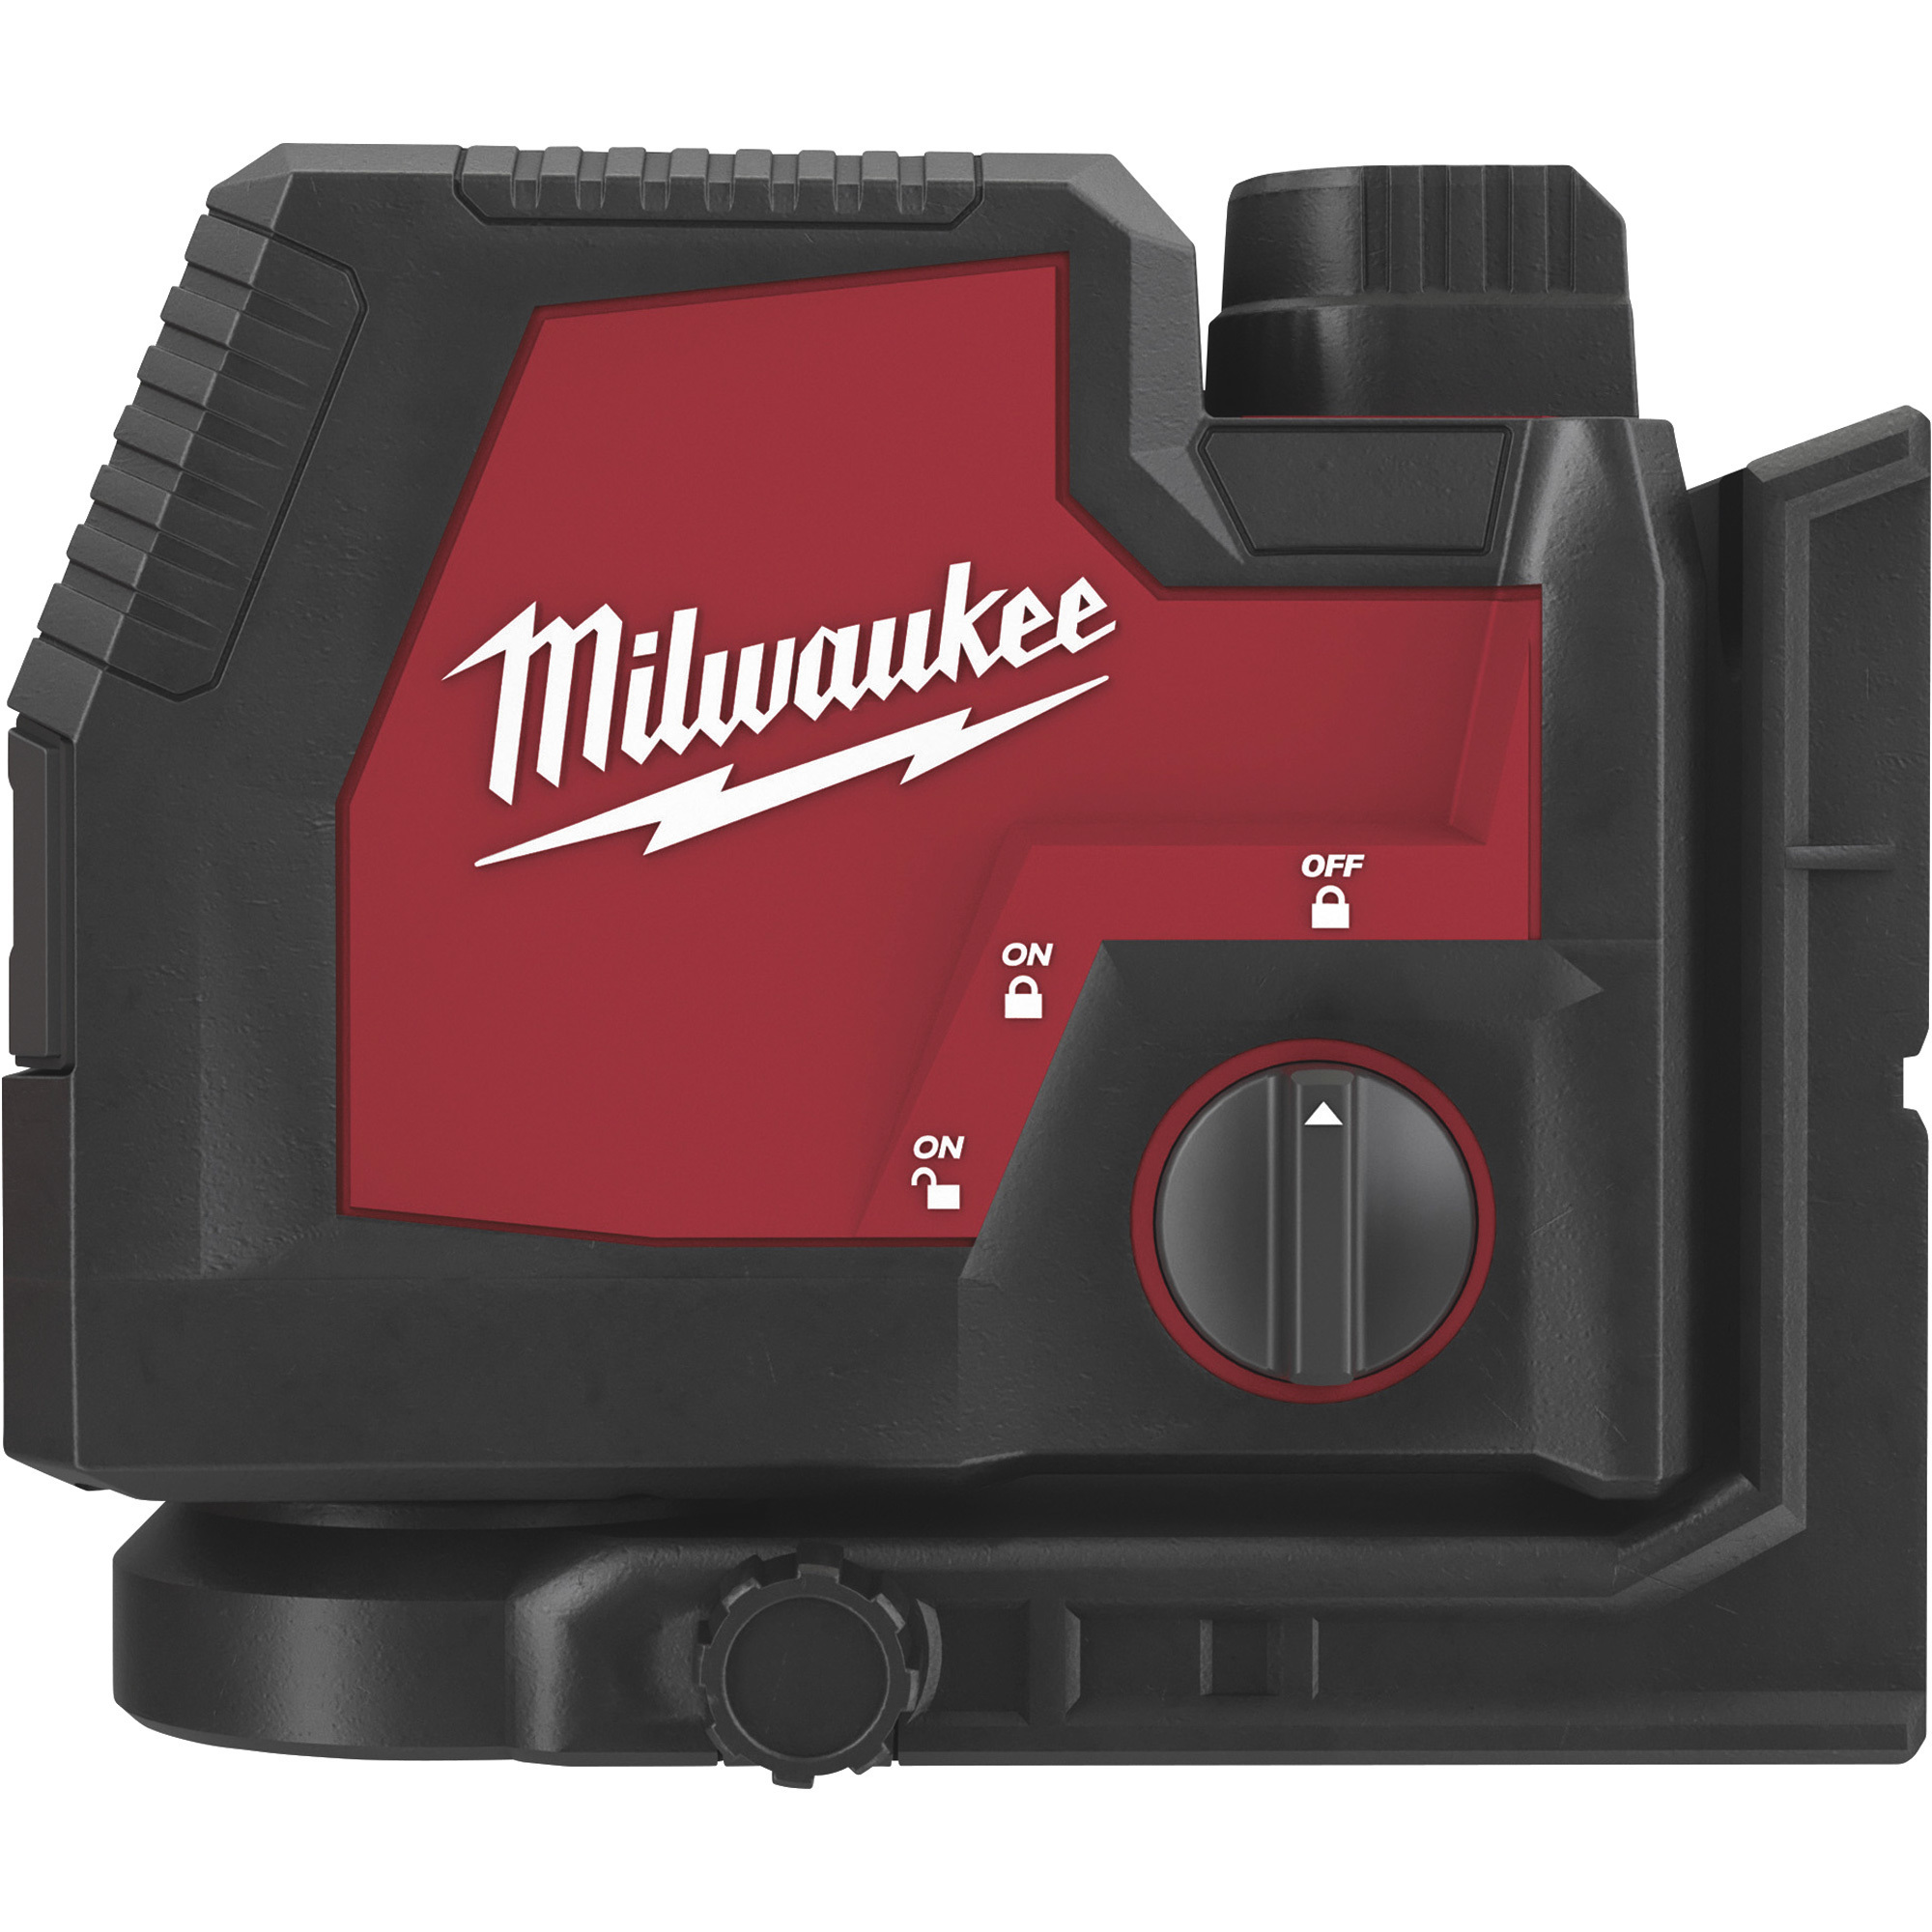 Milwaukee USB Rechargeable Green Cross Line and Plumb Points Laser, Model 3522-21